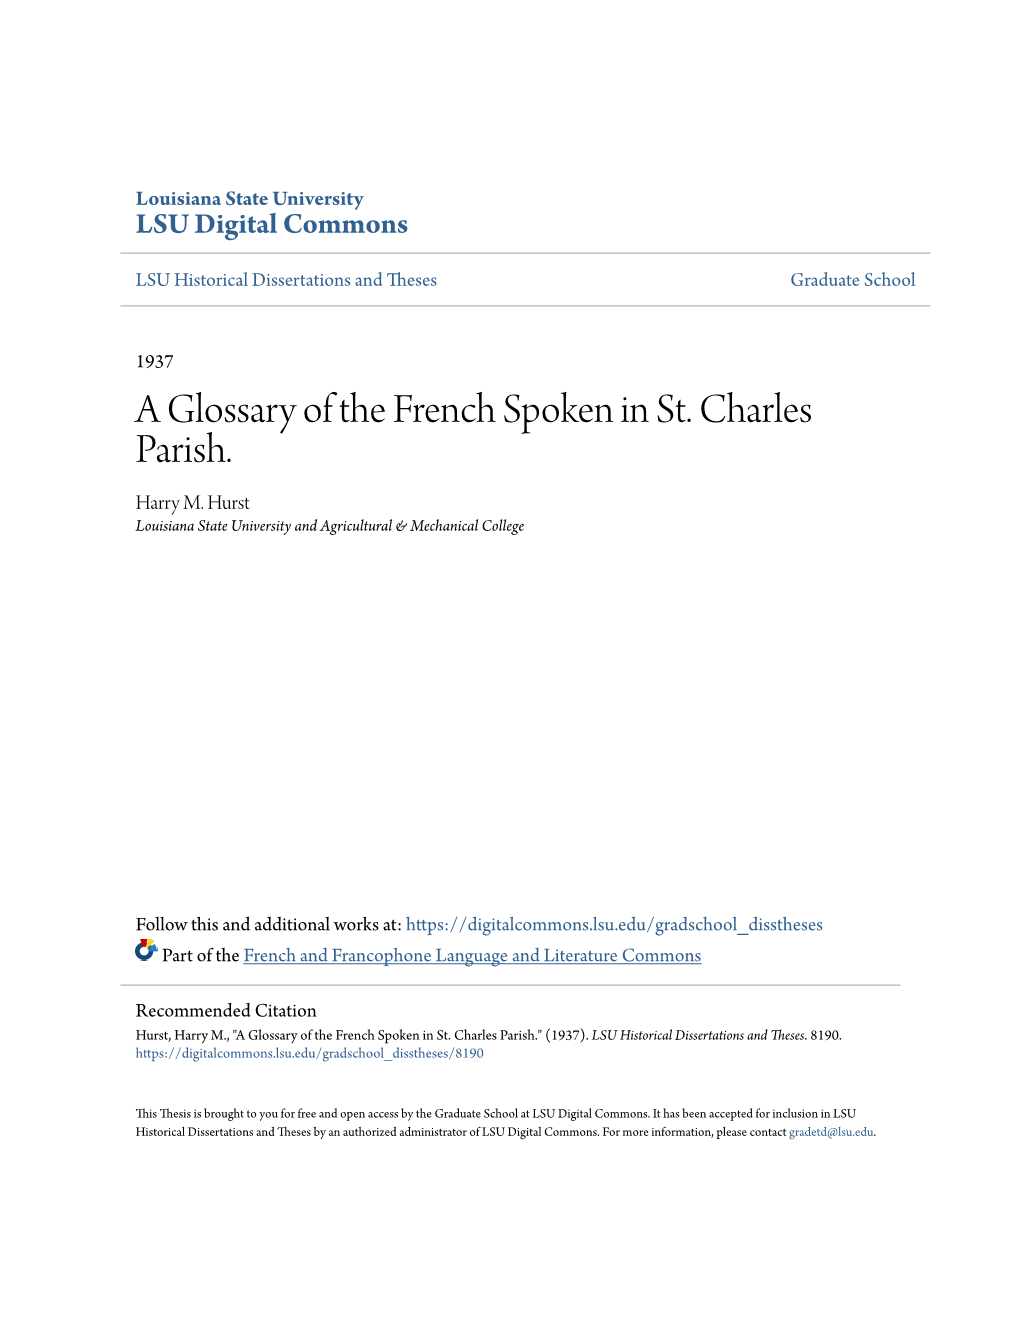 A Glossary of the French Spoken in St. Charles Parish. Harry M